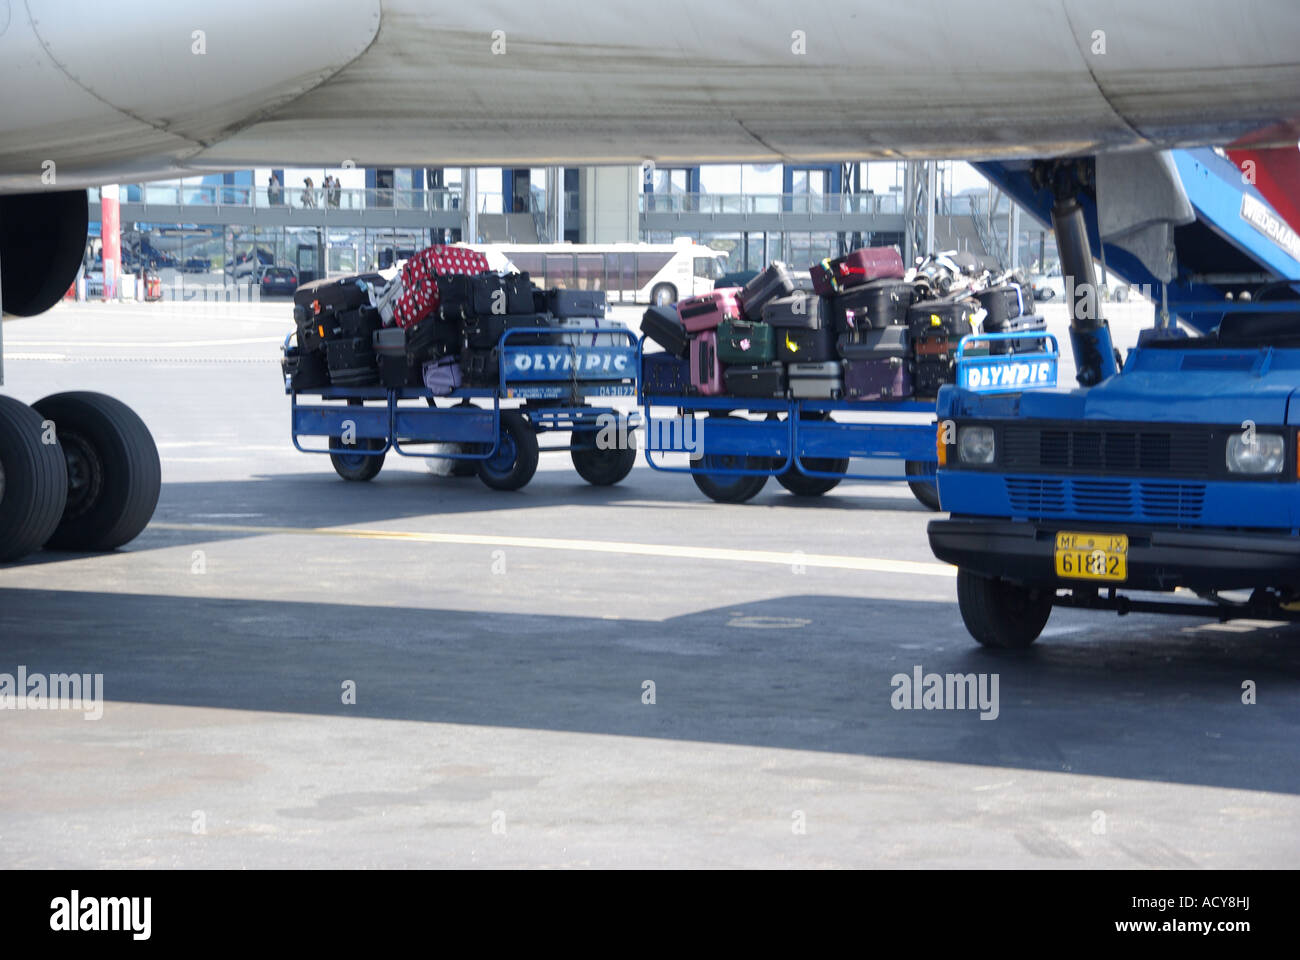 Thessaloniki Greek airport view below airplane fuselage of passengers suitcase luggage on trolleys awaiting loading onto holiday aircraft Greece Stock Photo